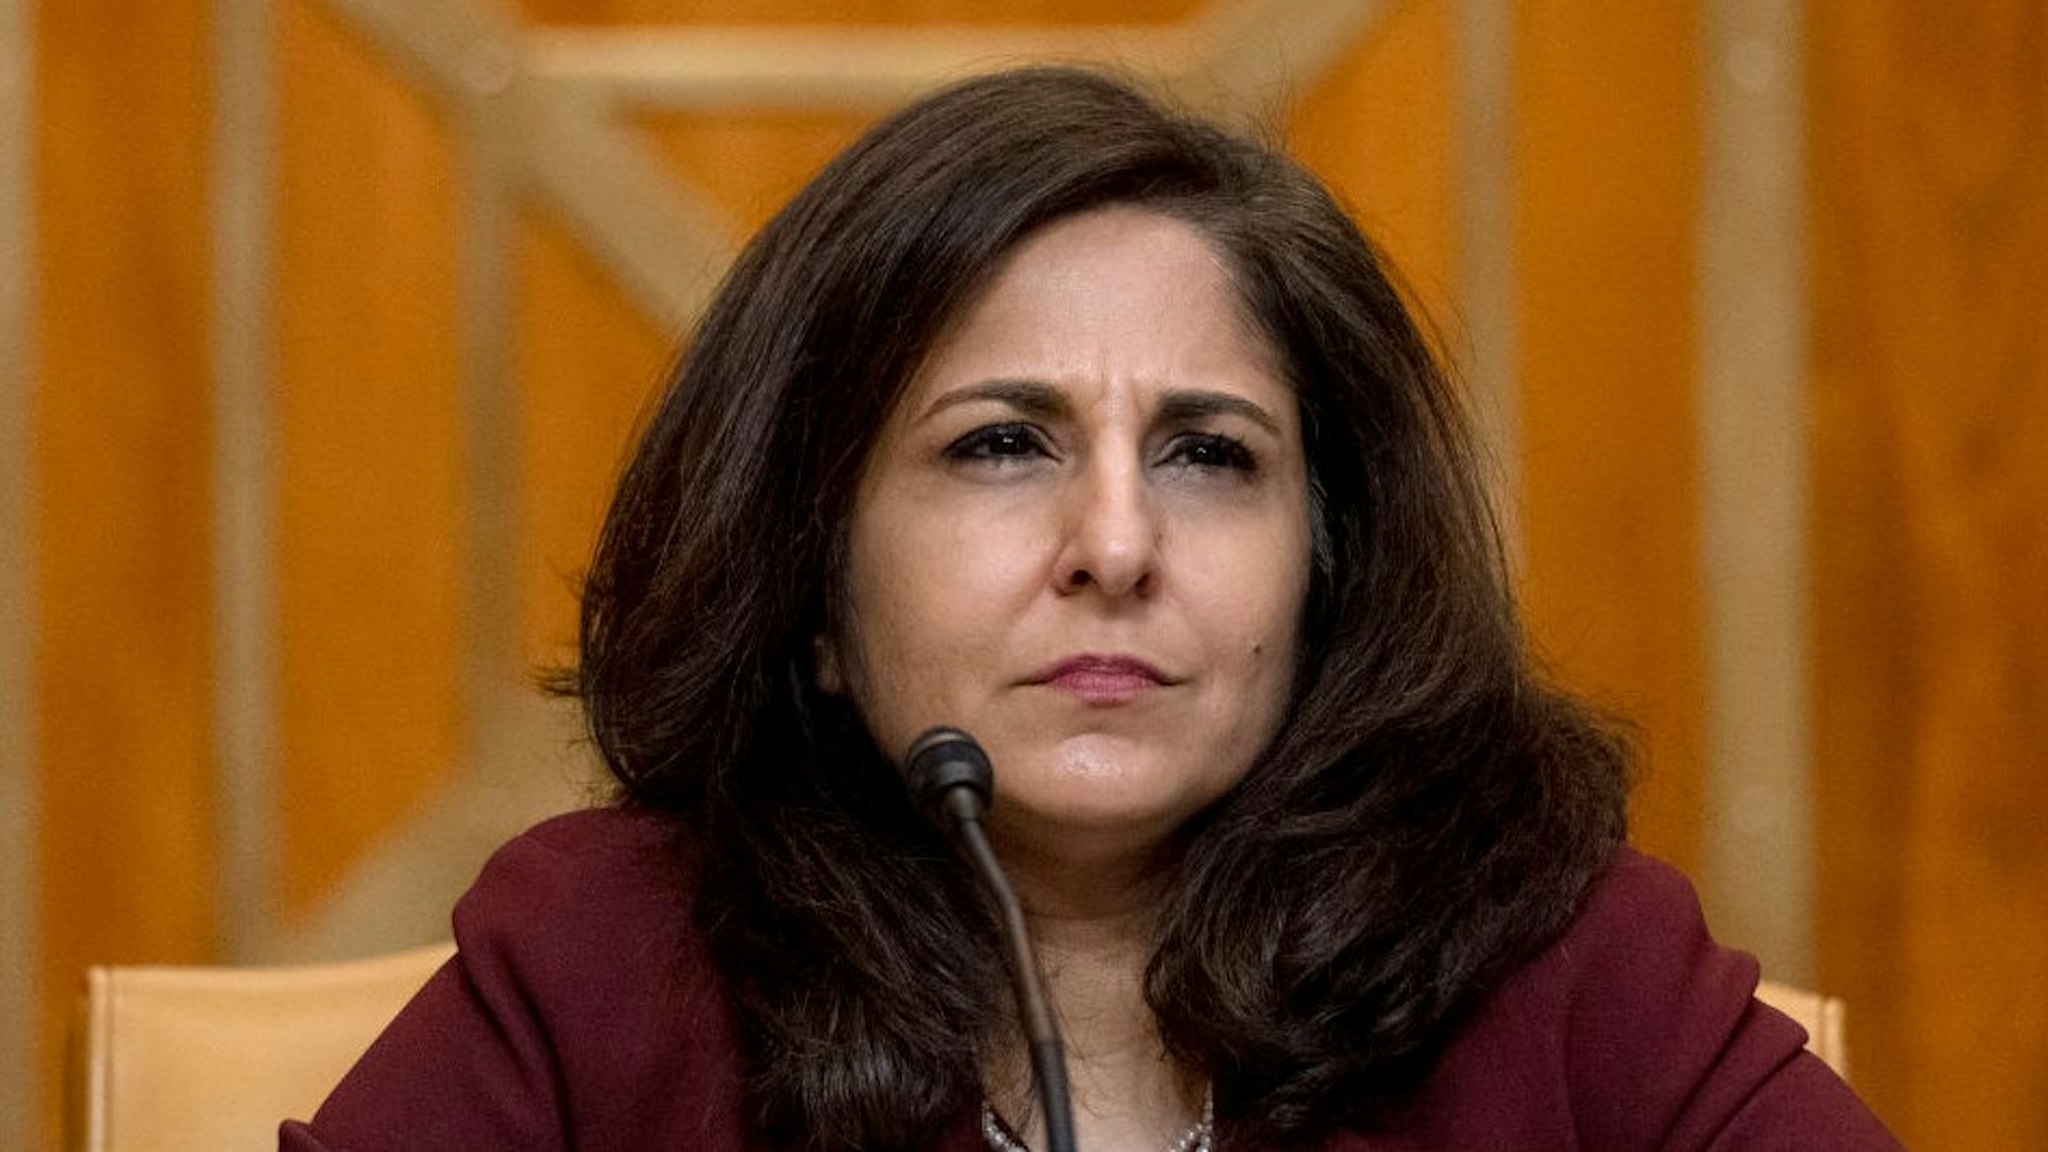 WASHINGTON, DC - FEBRUARY 10: Neera Tanden, President Joe Bidens nominee for Director of the Office of Management and Budget (OMB), appears before a Senate Committee on the Budget hearing on Capitol Hill on February 10, 2021 in Washington, DC. Tanden helped found the Center for American Progress, a policy research and advocacy organization and has held senior advisory positions in Democratic politics since the Clinton administration. (Photo by